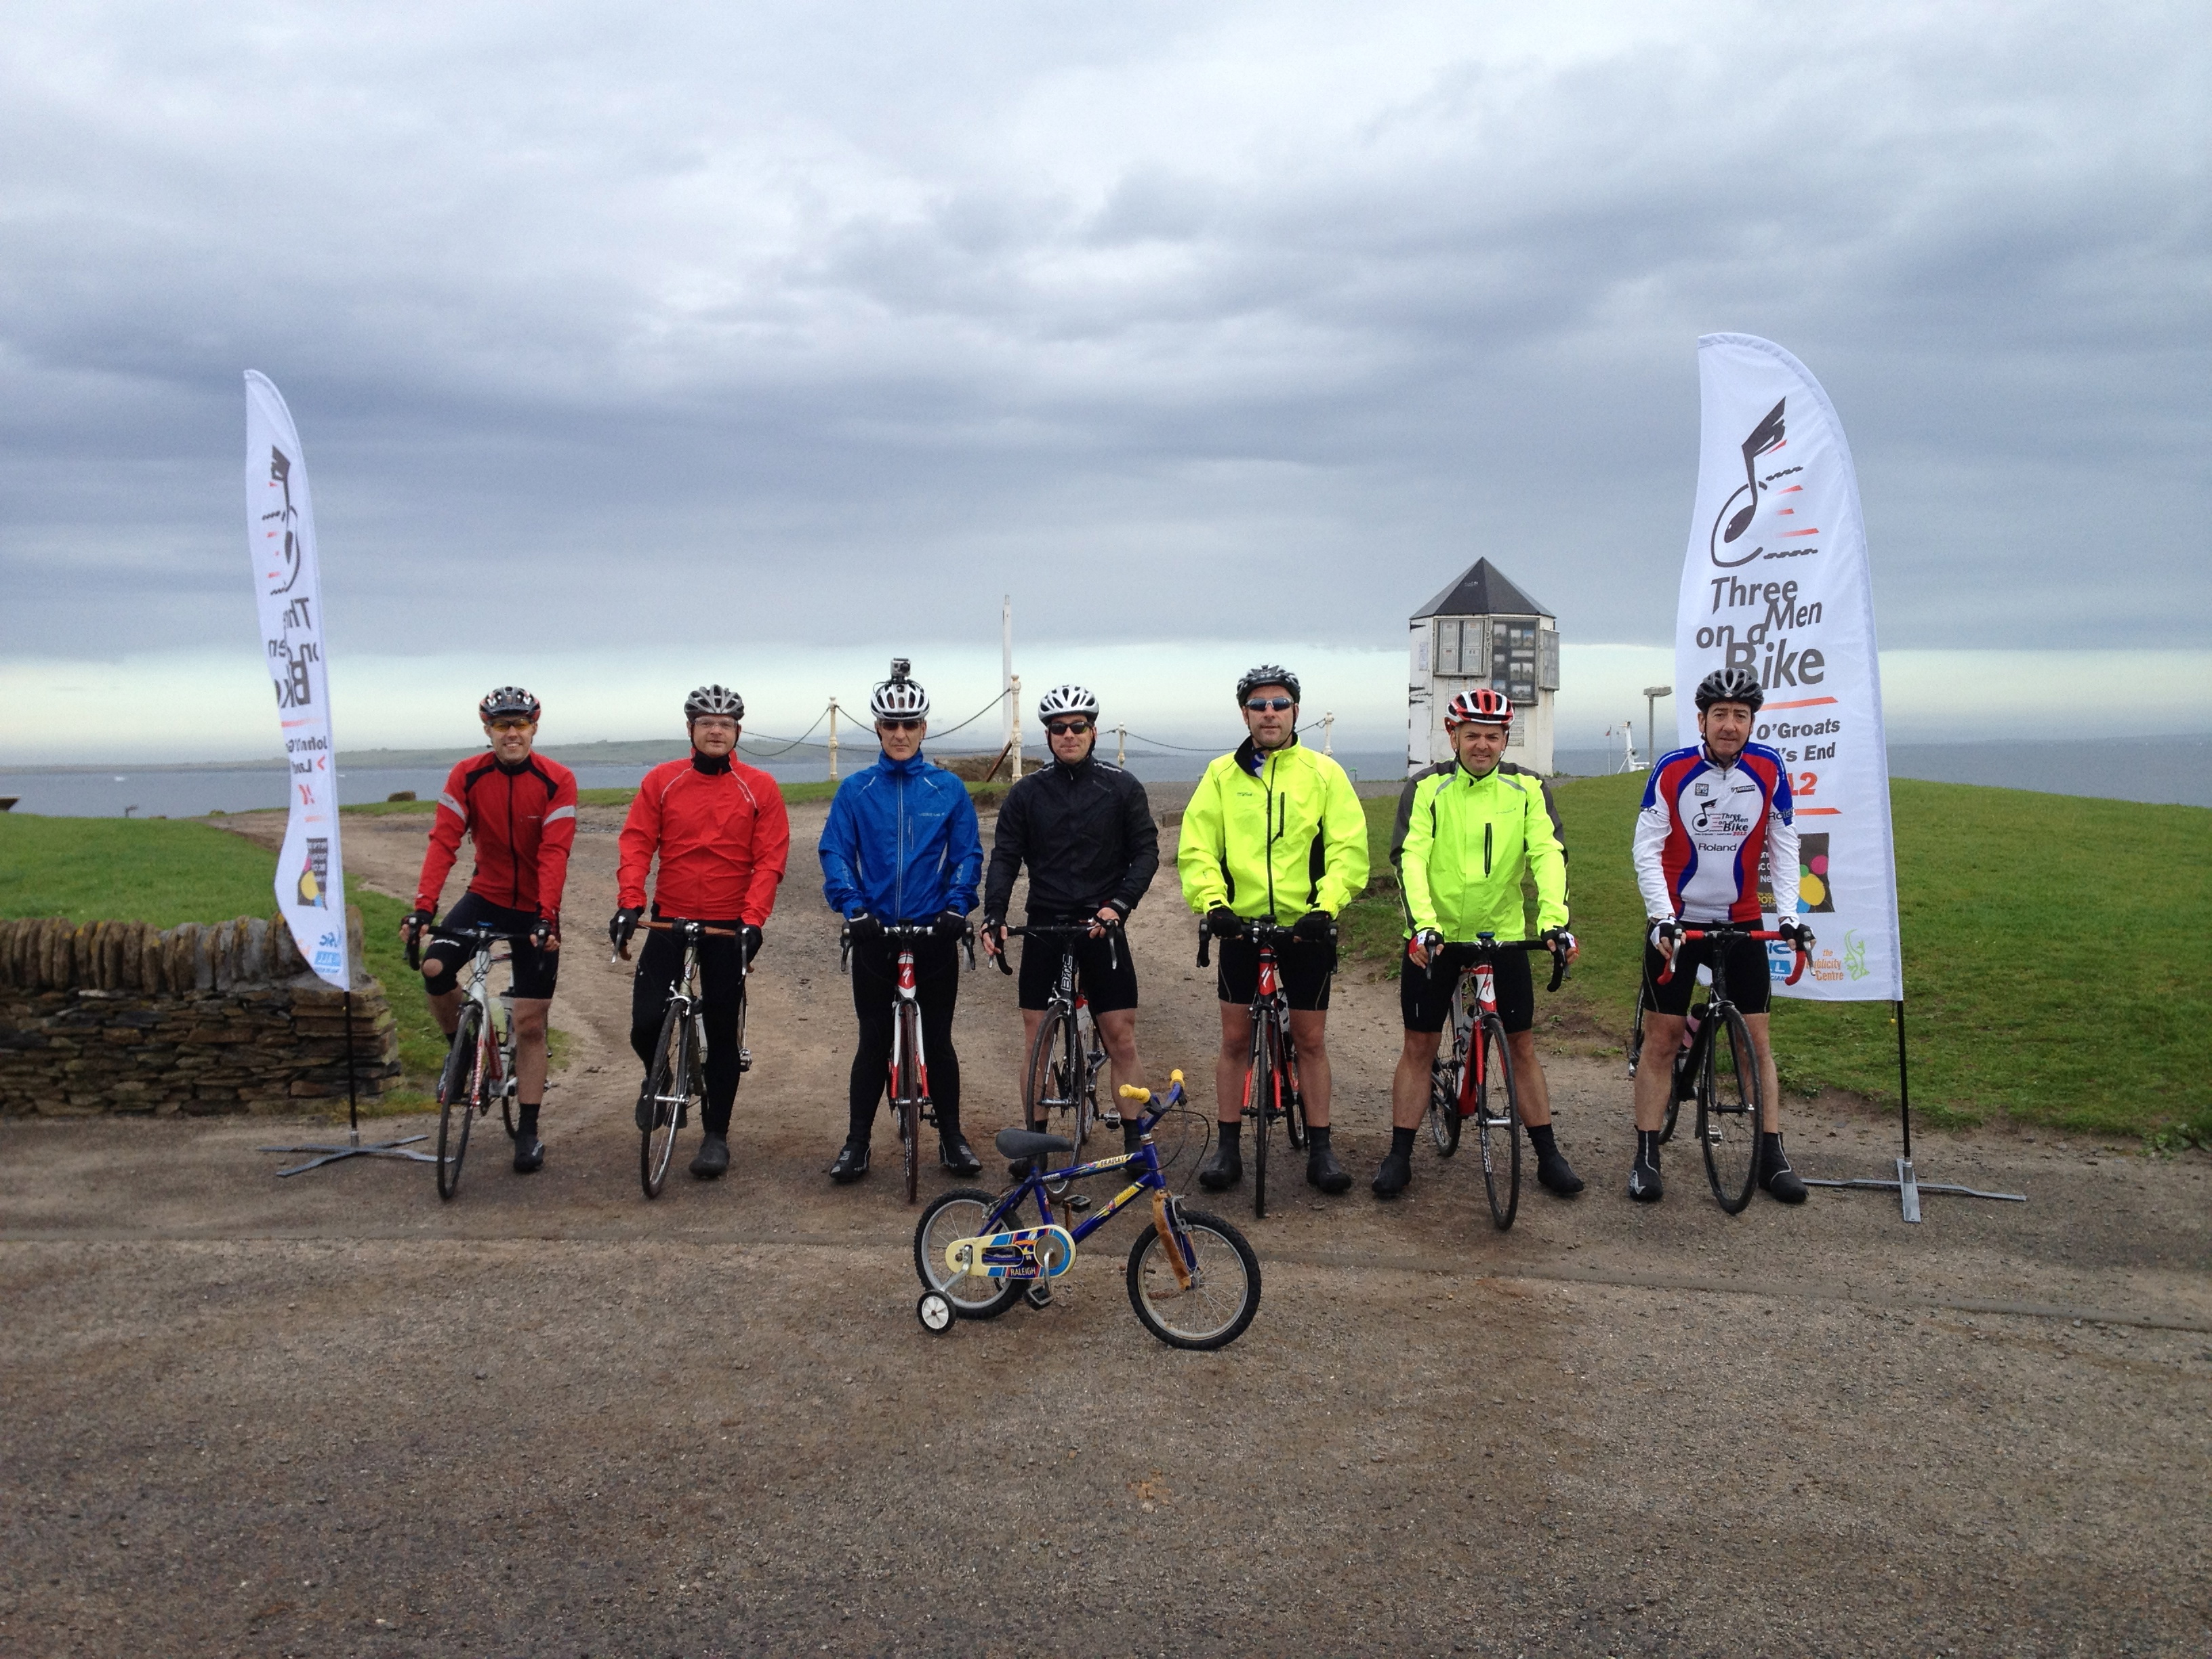 day 1 - Setting off from John O'Groats